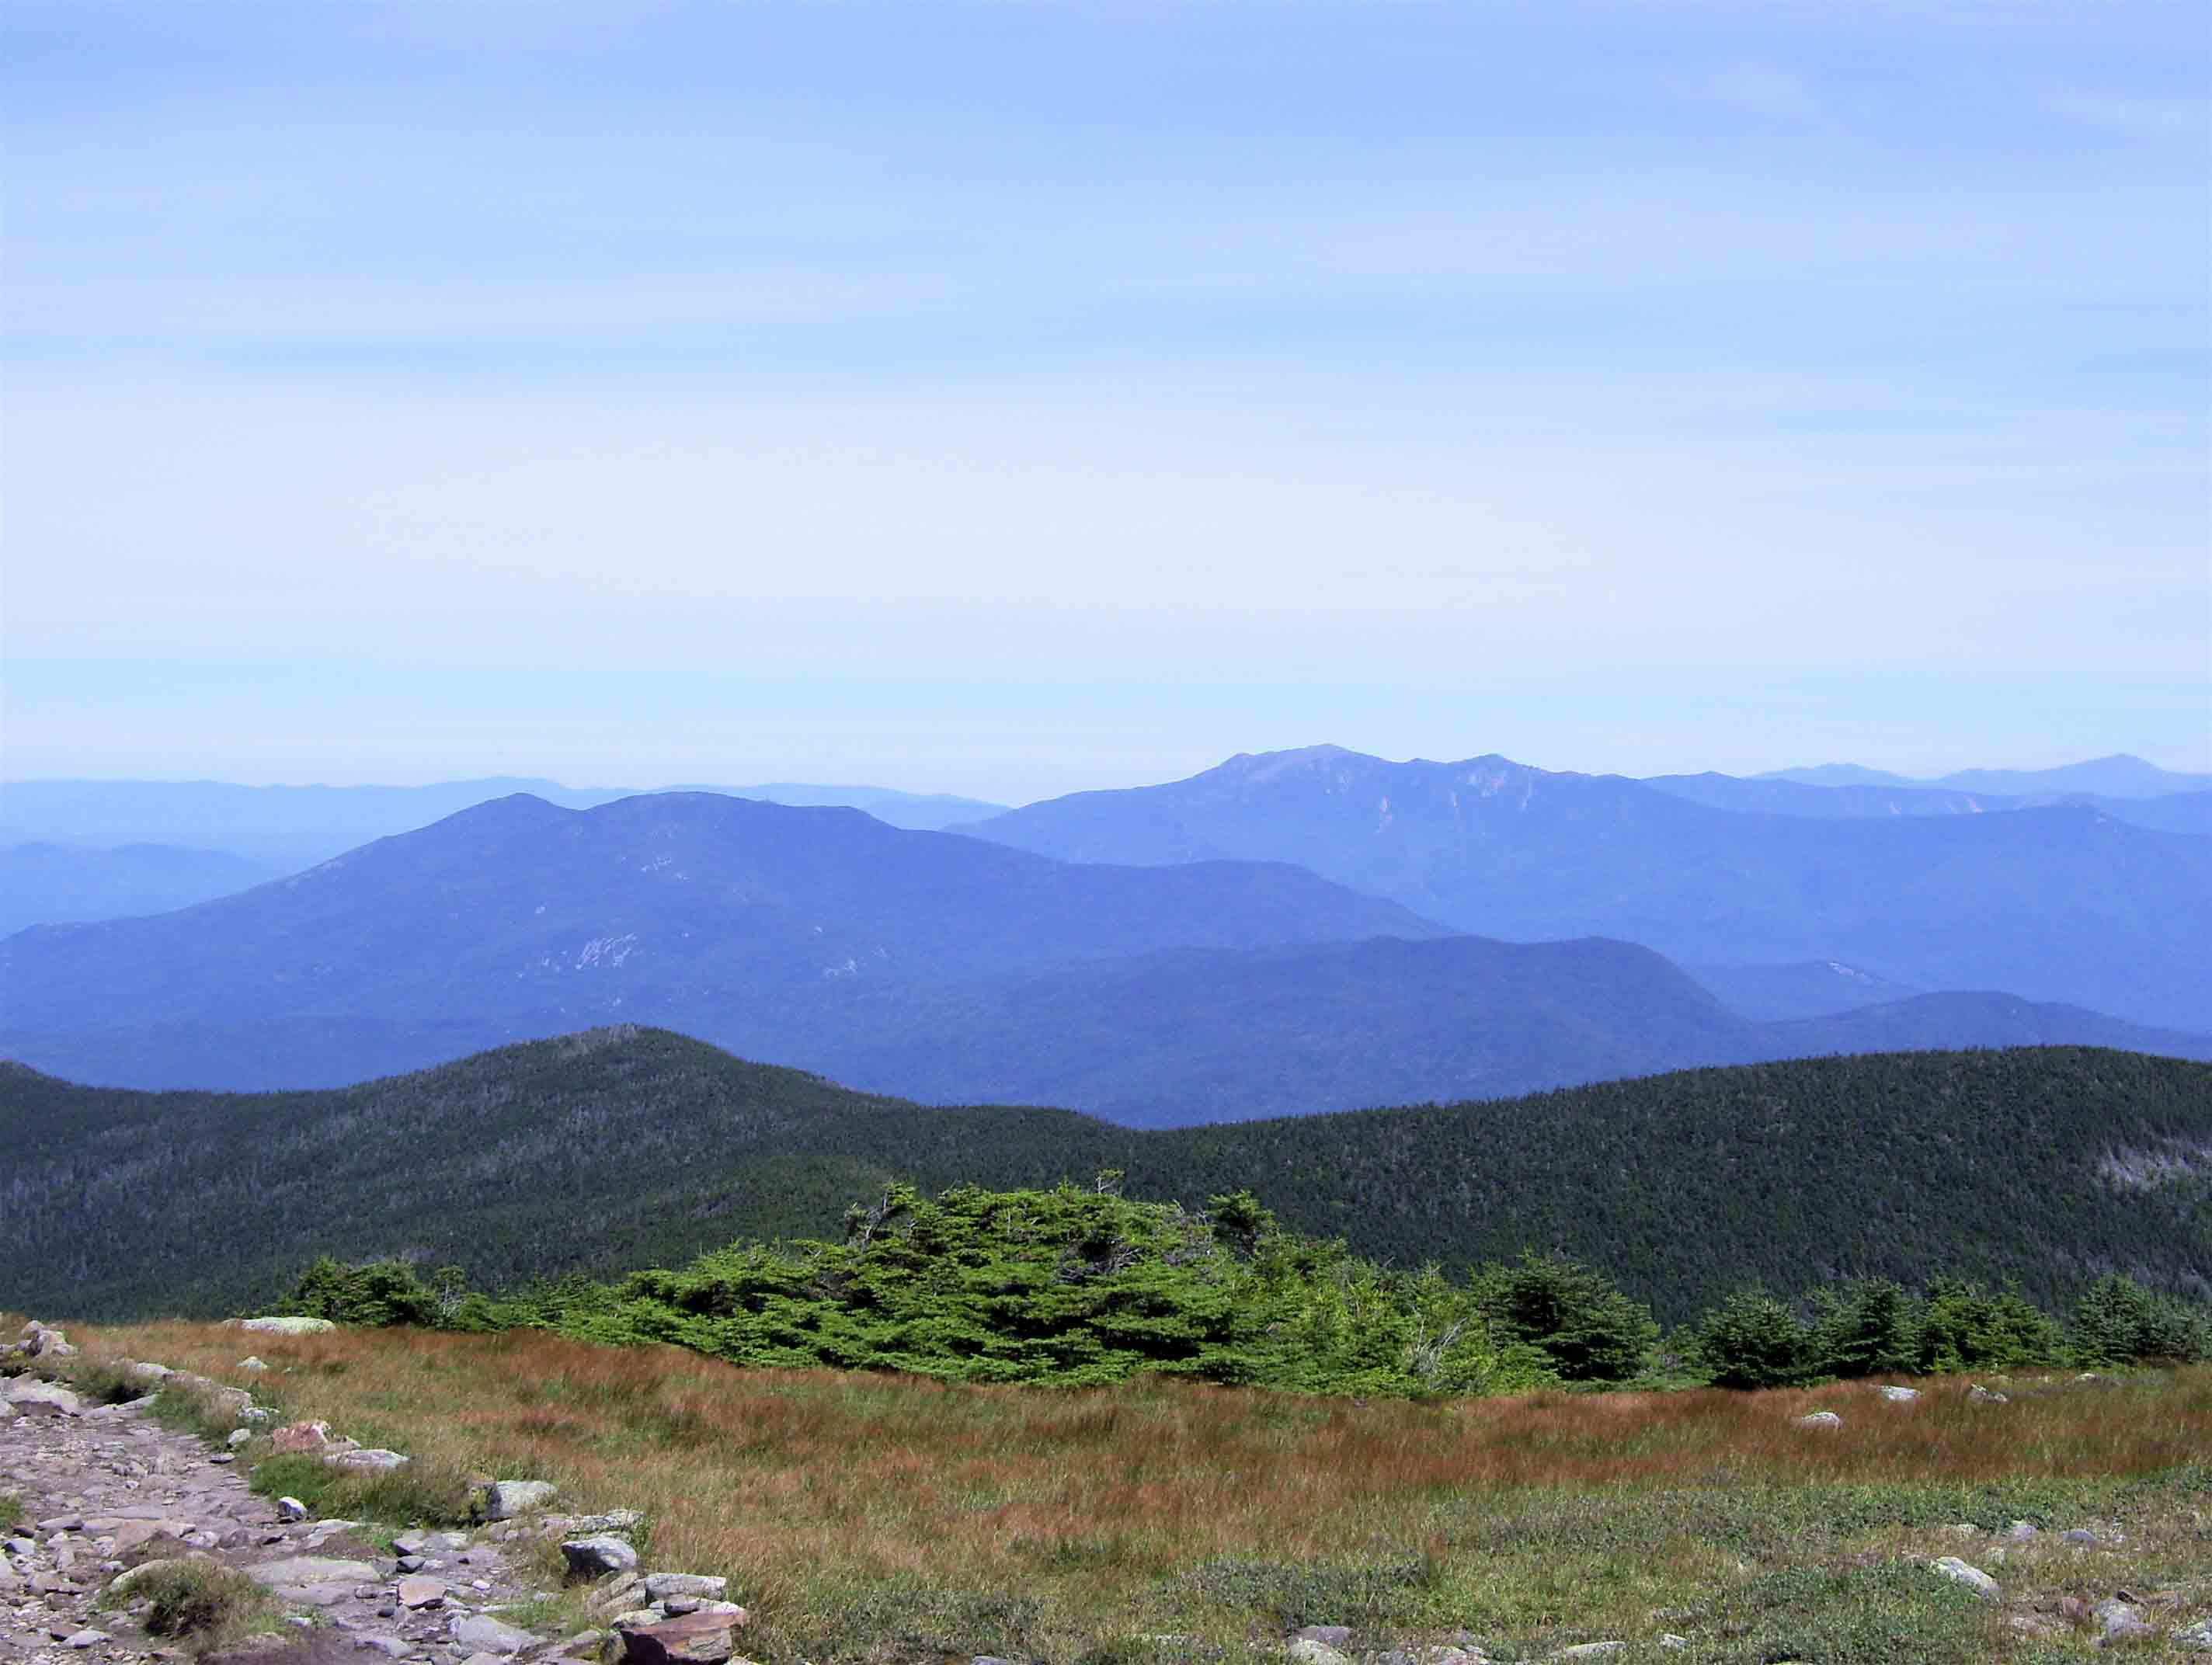 mm 3.8 - View to the northeast from near the summit of Mt. Moosilauke, showing the Kinsmans, the Franconia Range and in the far distance, the Presidential Range. The highest mountain seen is Mt. Washington on the far right side of the picture which is 60 trail miles away.  Courtesy dlcul@conncoll.edu